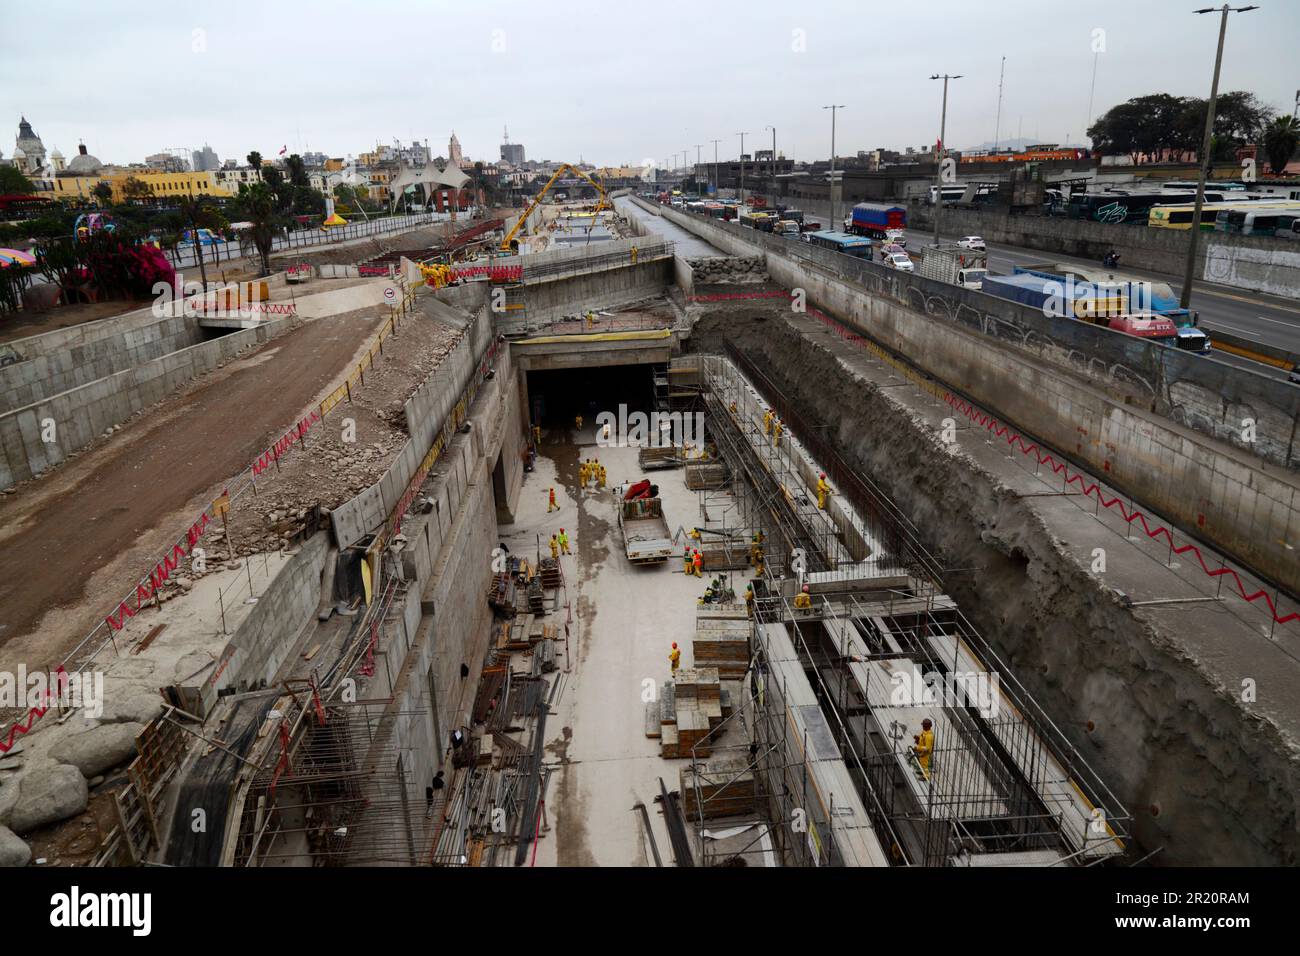 Construction site of tunnel under the River Rimac for a new motorway and Yellow Line Via Expresa bus route, Lima, Peru. The tunnel runs for 1.8km under the River Rimac, which was diverted to allow construction to take place. Works started in January 2012 and took 6 years, the tunnel opened in June 2018. The Brazilian company OAS built the tunnel. The 2 towers in the far left background are the cathedral in the historic centre. Stock Photo